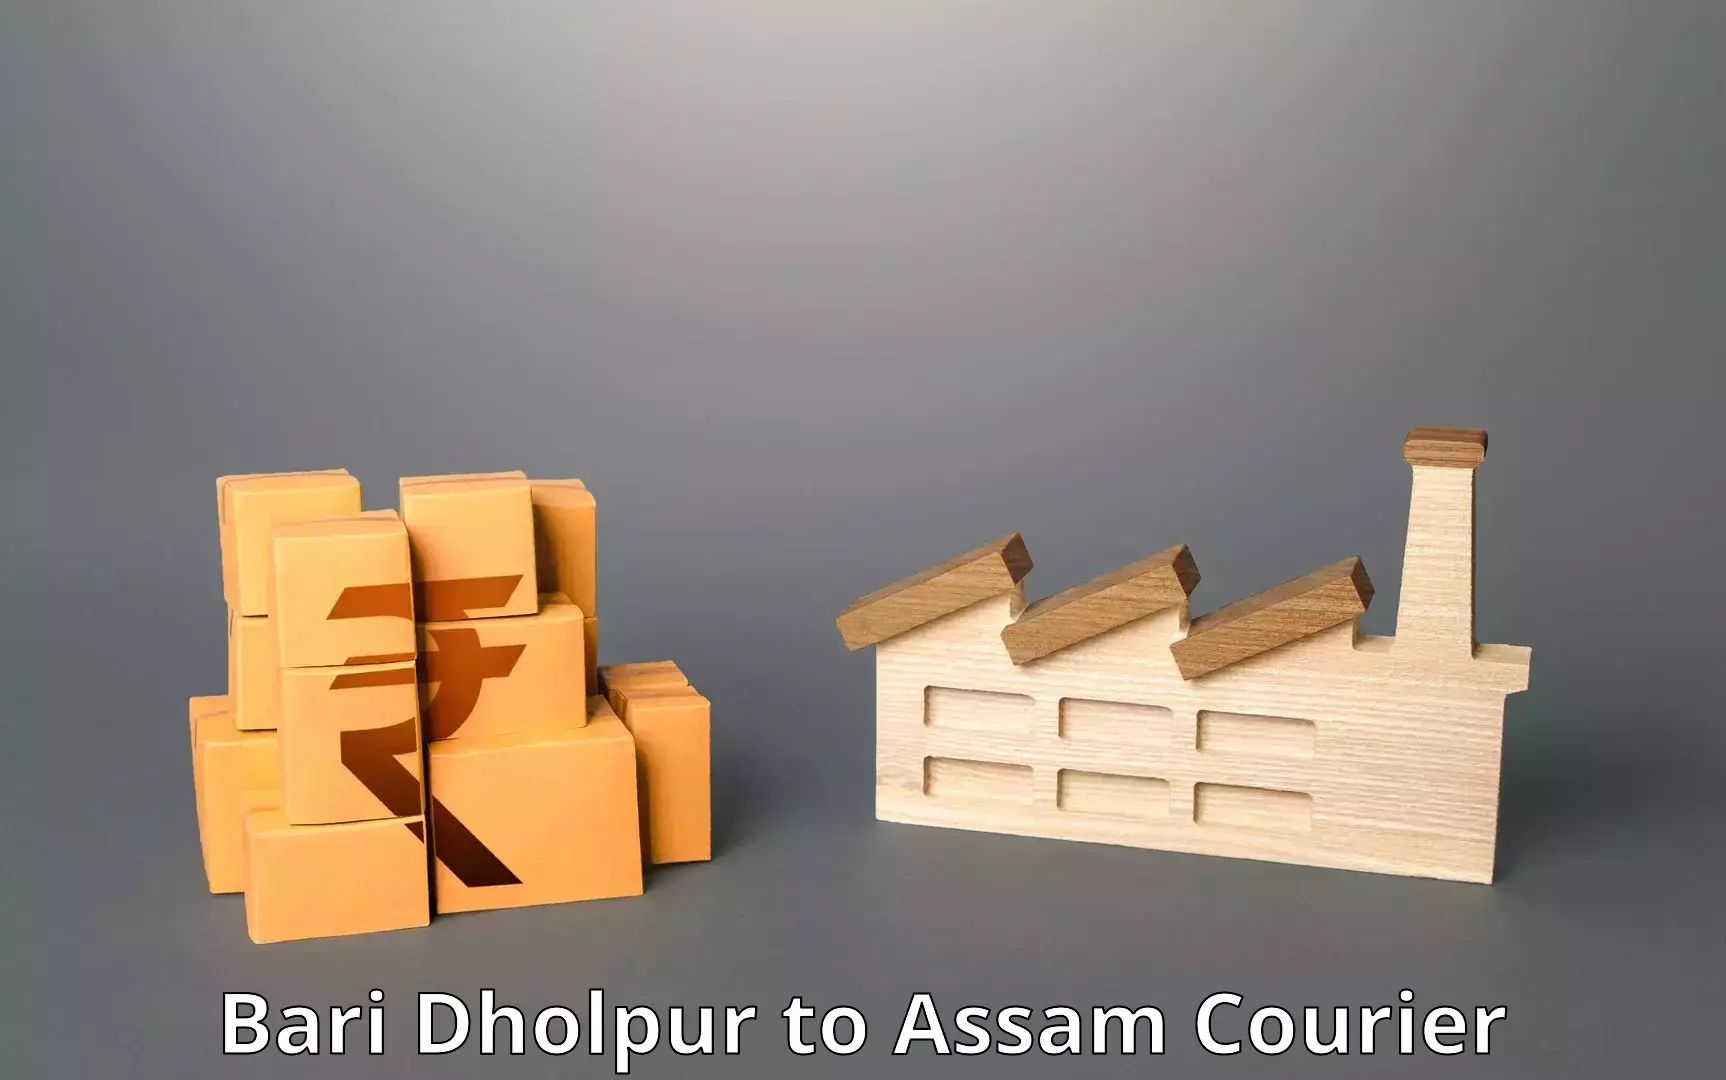 Multi-national courier services Bari Dholpur to Assam